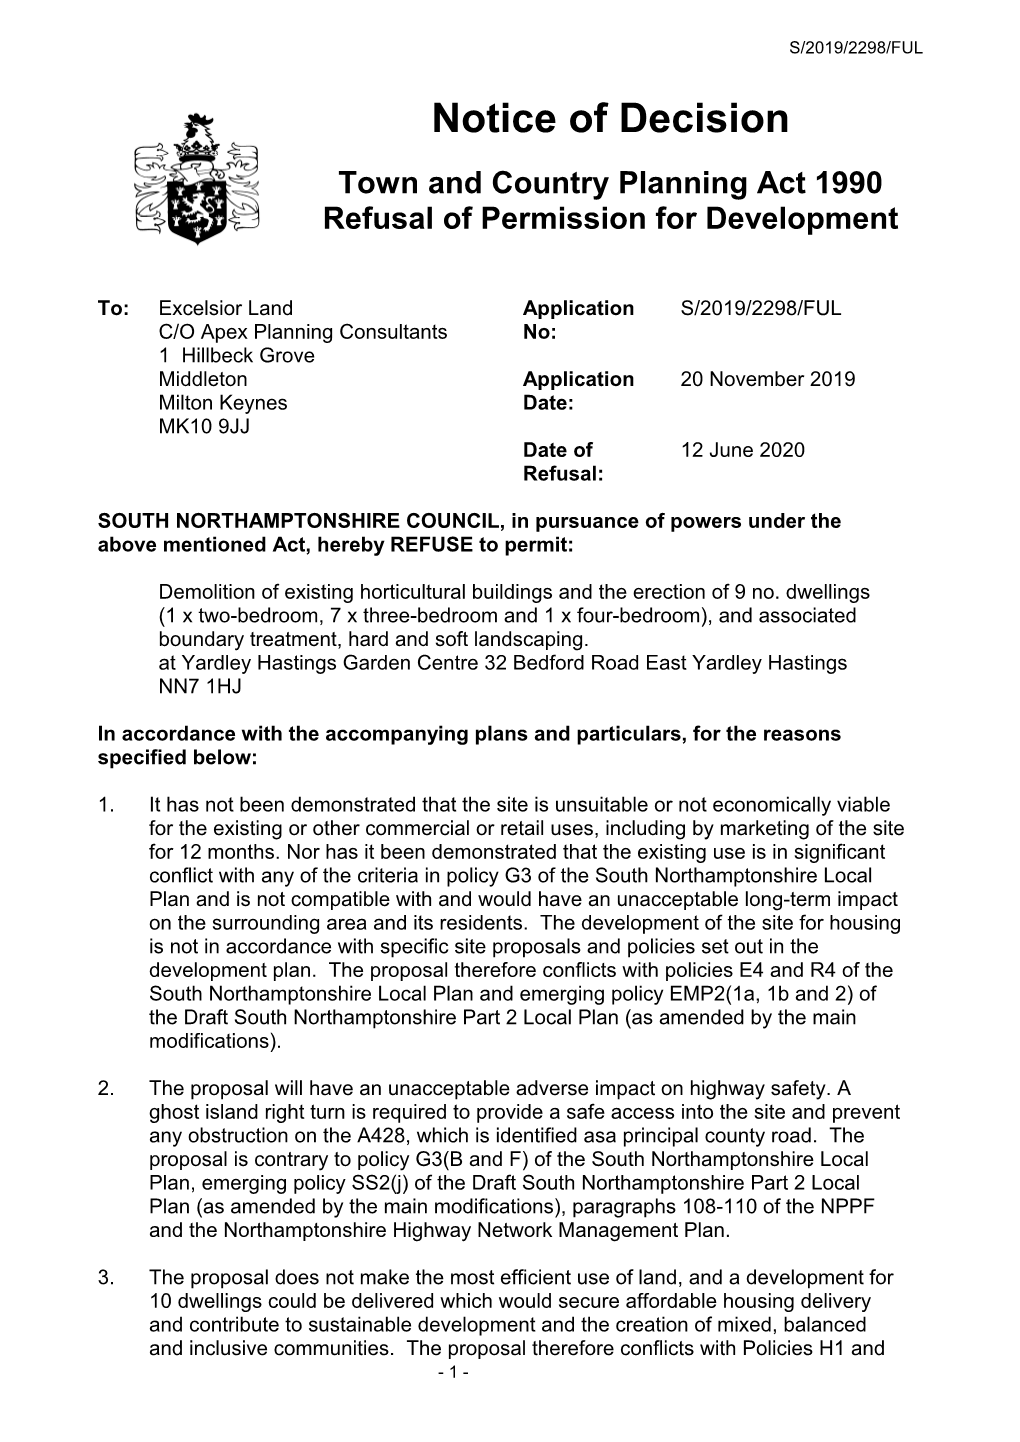 Notice of Decision Town and Country Planning Act 1990 Refusal of Permission for Development